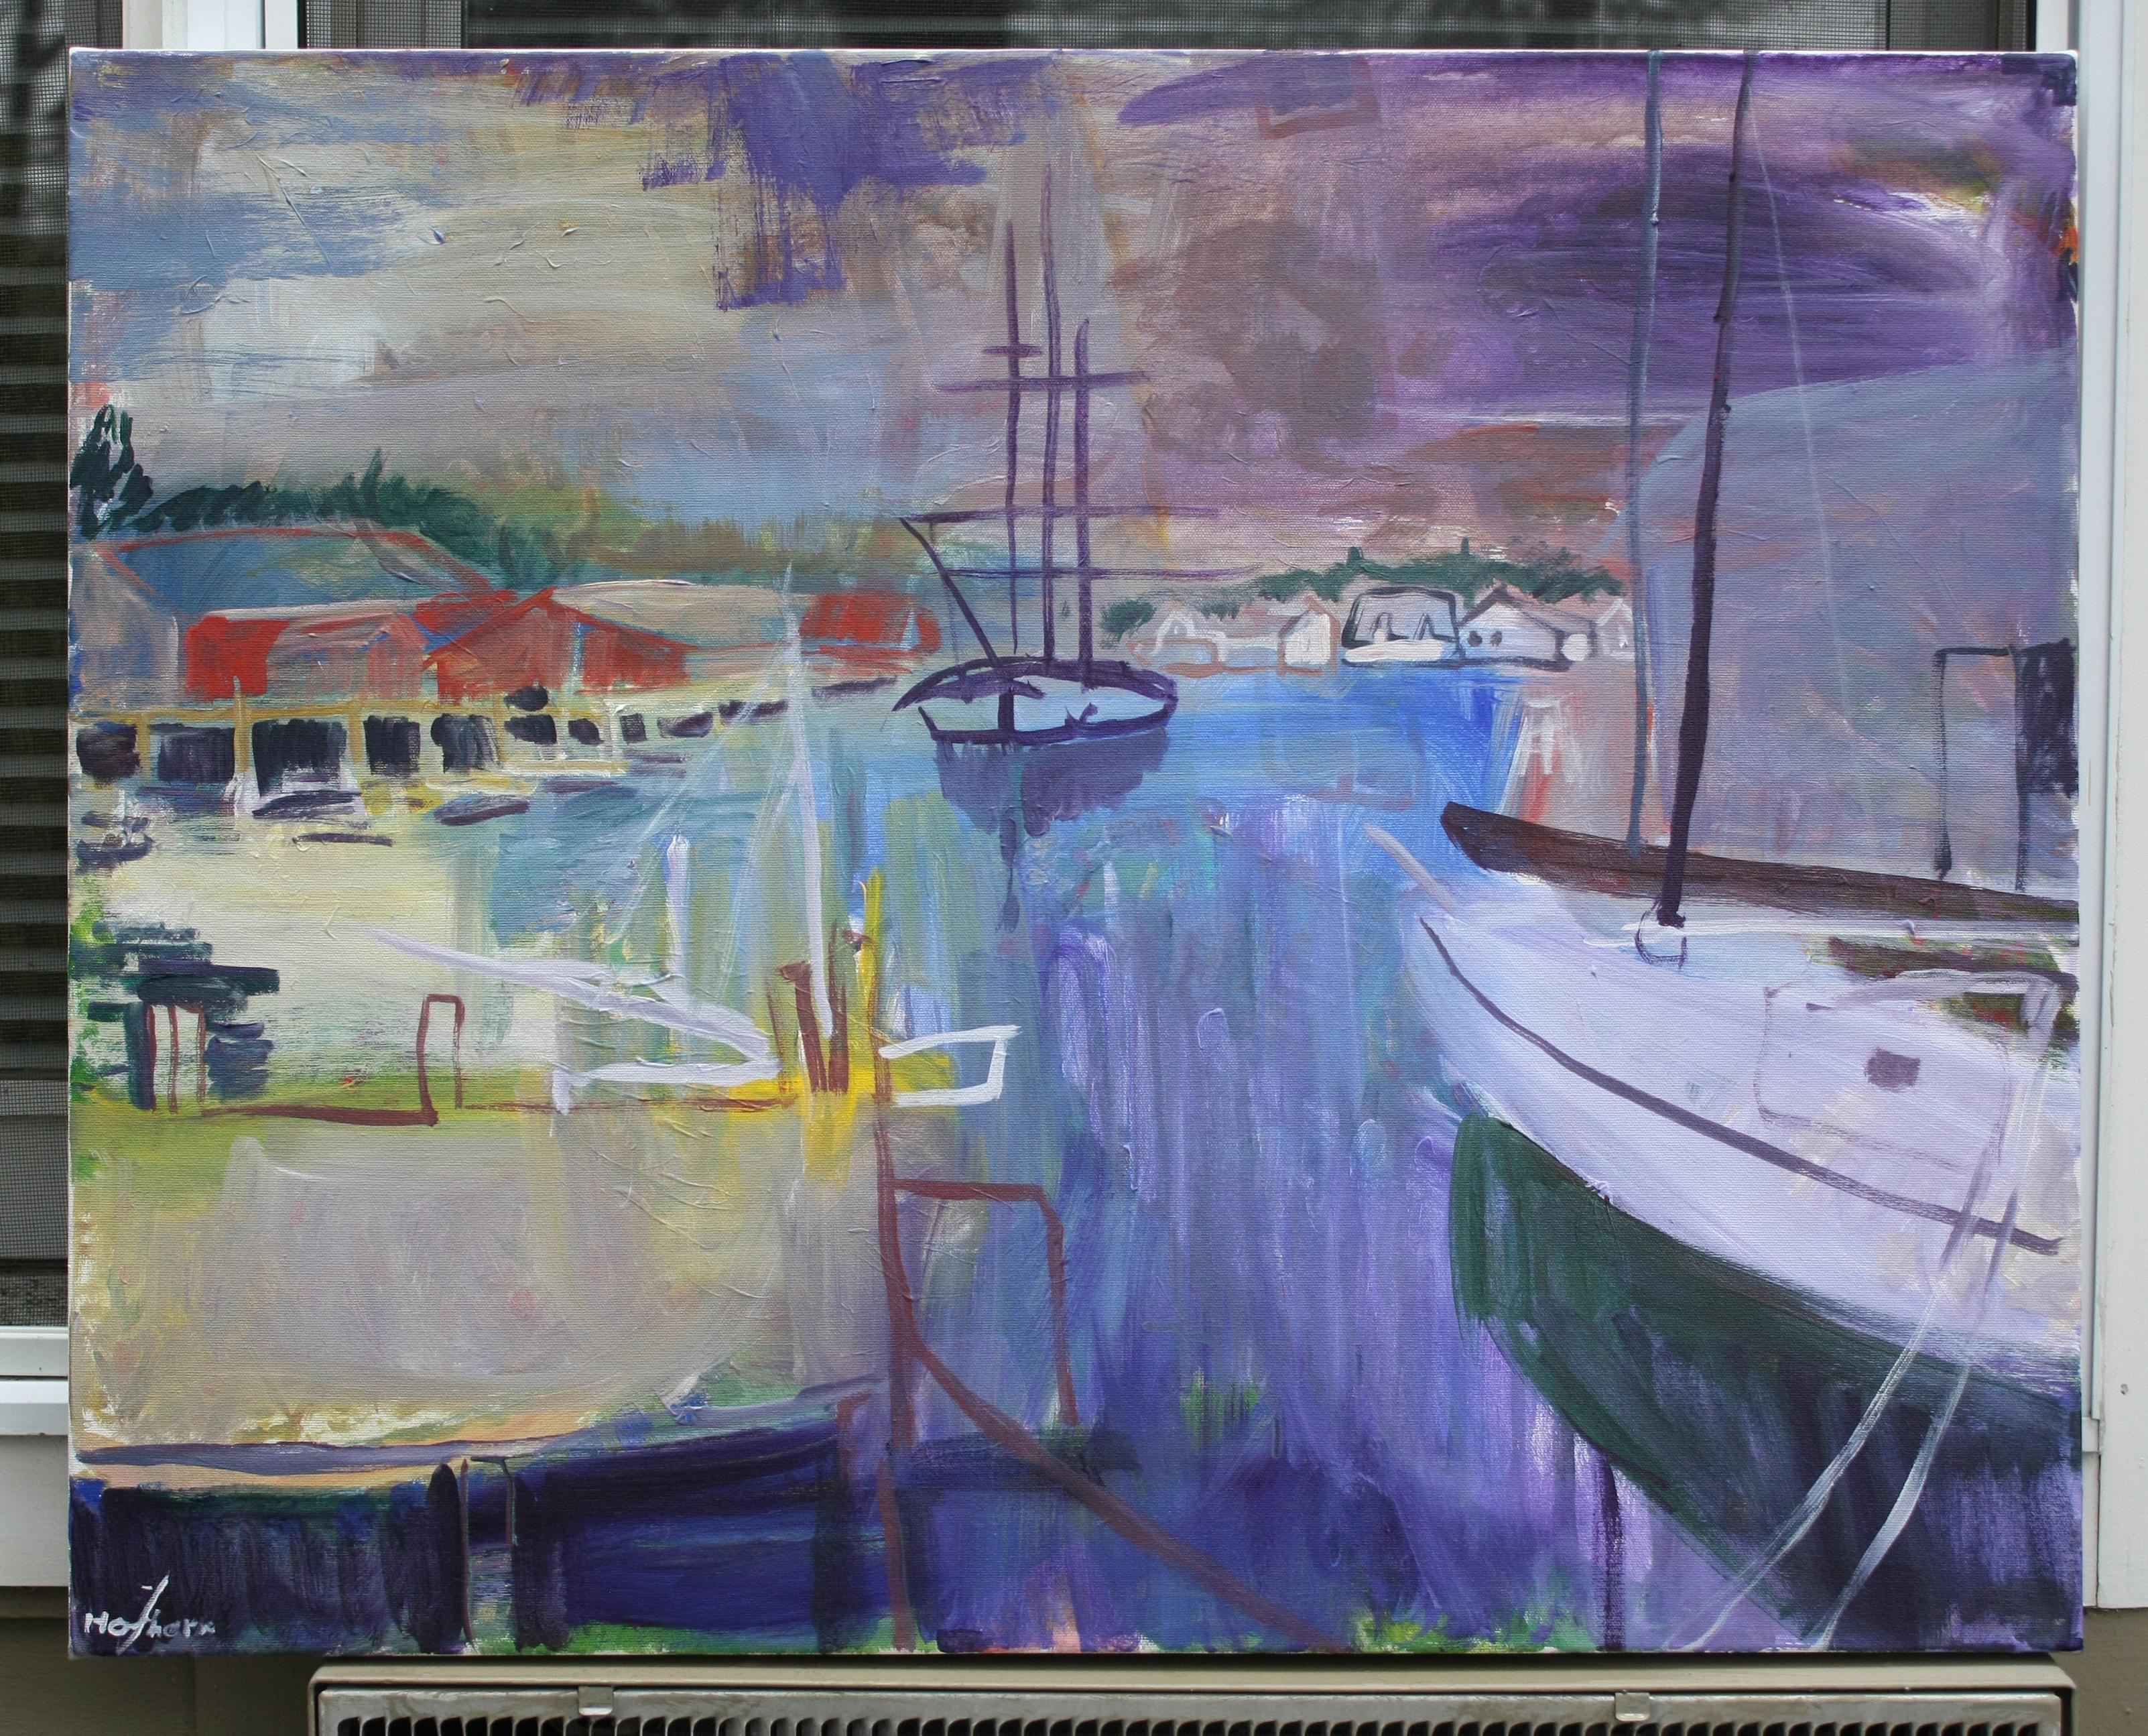 <p>Artist Comments<br>A New England seaport transforms into a stylized seascape through unusual colors, expressive strokes, and minimal details. One sailboat navigates the water while the other remains docked, nestled among the houses on the shore.